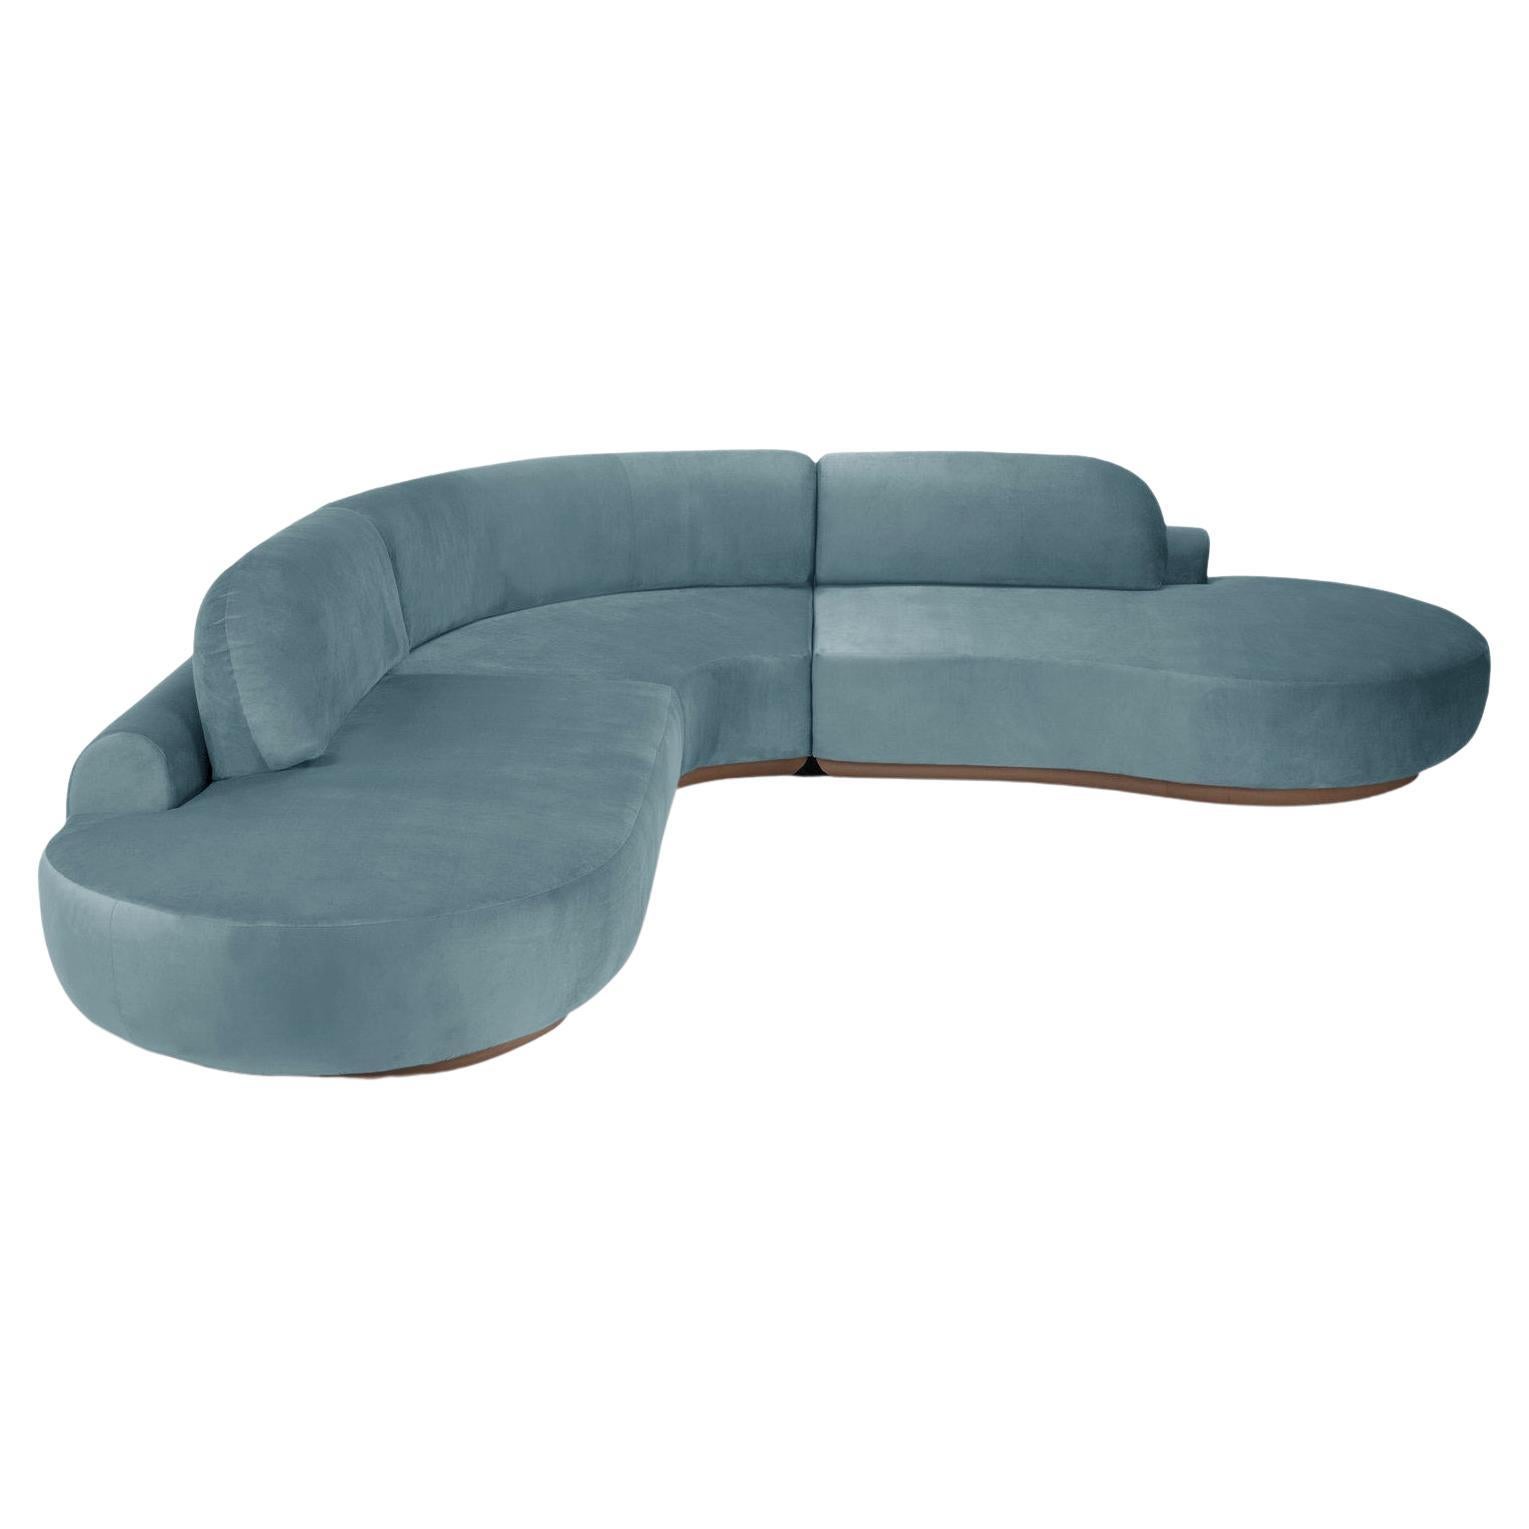 Naked Curved Sectional Sofa, 3 Piece with Beech Ash-056-1 and Paris Dark Blue For Sale